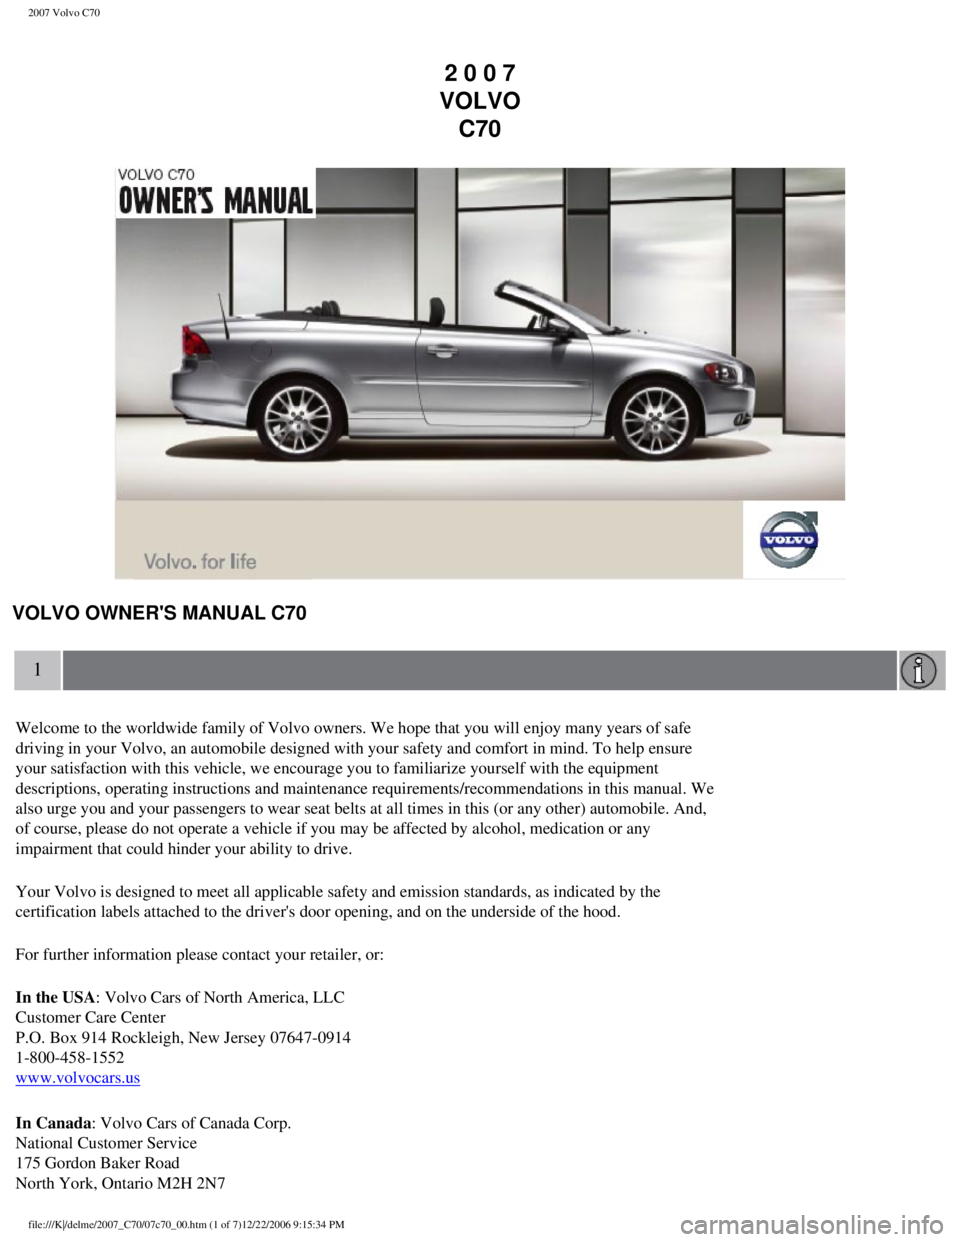 VOLVO C70 CONVERTIBLE 2007  Owner´s Manual 
2007 Volvo C70 
2 0 0 7  
VOLVO  C70
 
VOLVO OWNERS MANUAL C70
1
 
Welcome to the worldwide family of Volvo owners. We hope that you will e\
njoy many years of safe 
driving in your Volvo, an automo